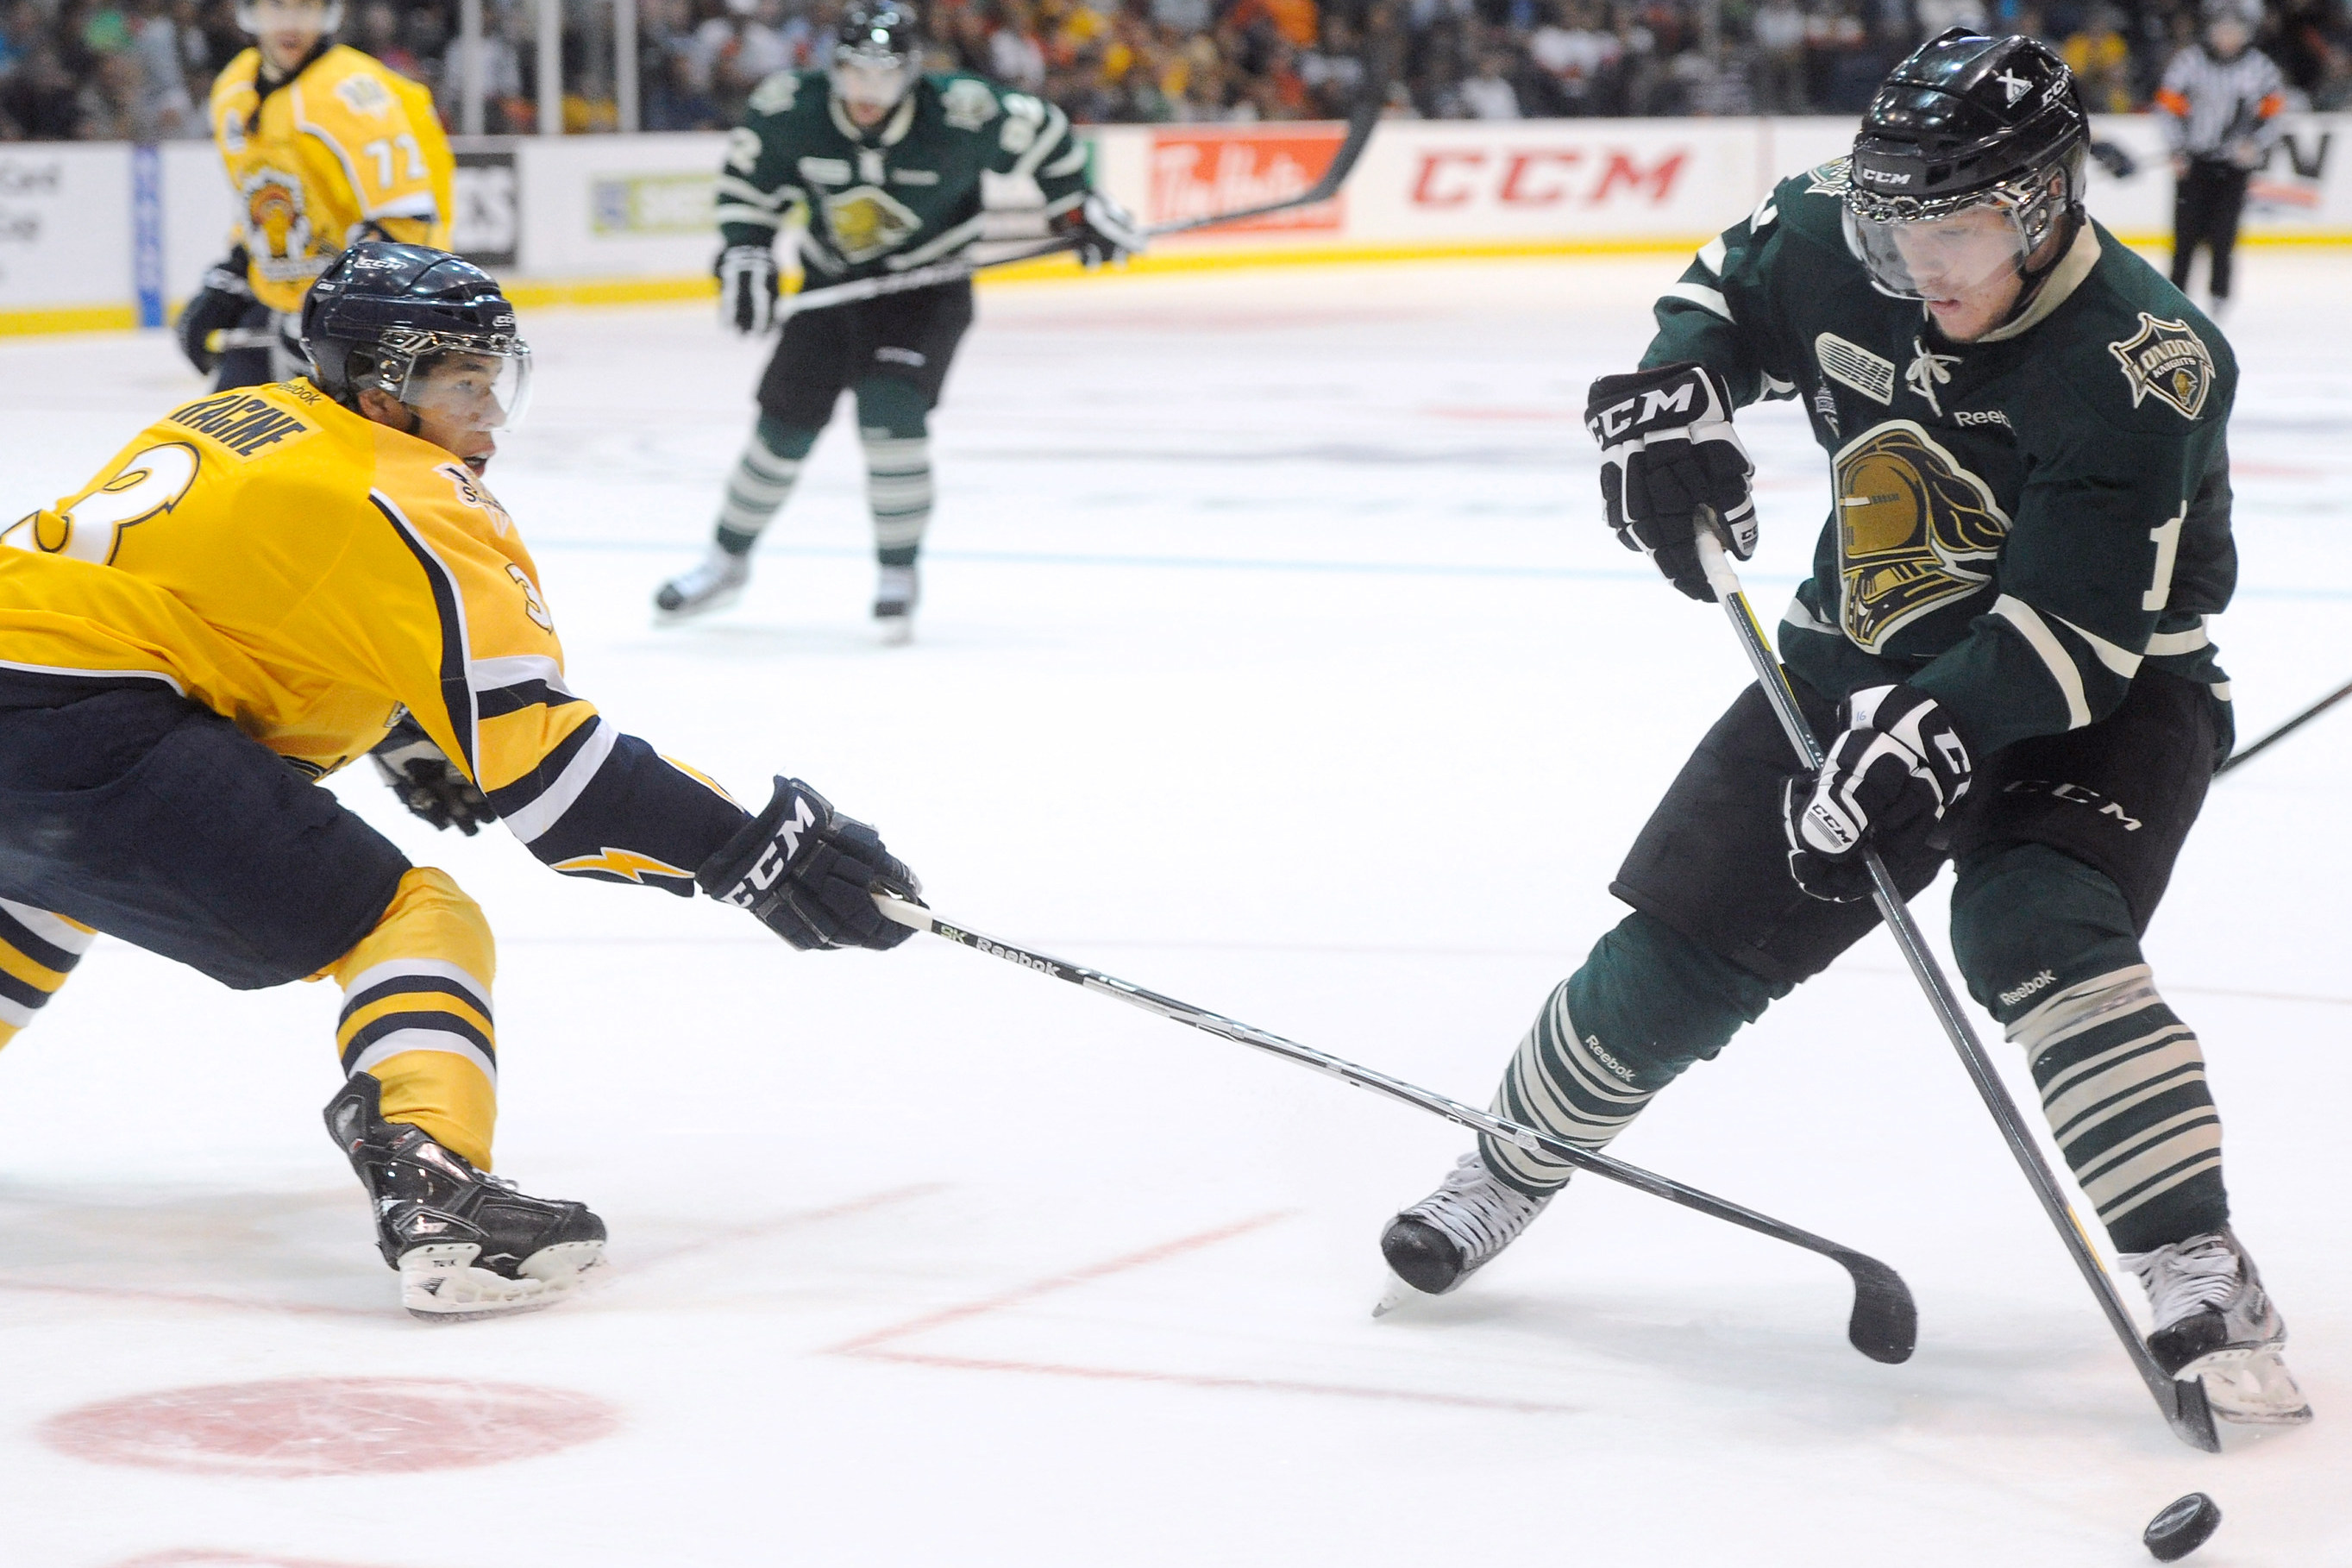 OHL FINALS: 5-3 loss pushes London Knights to brink